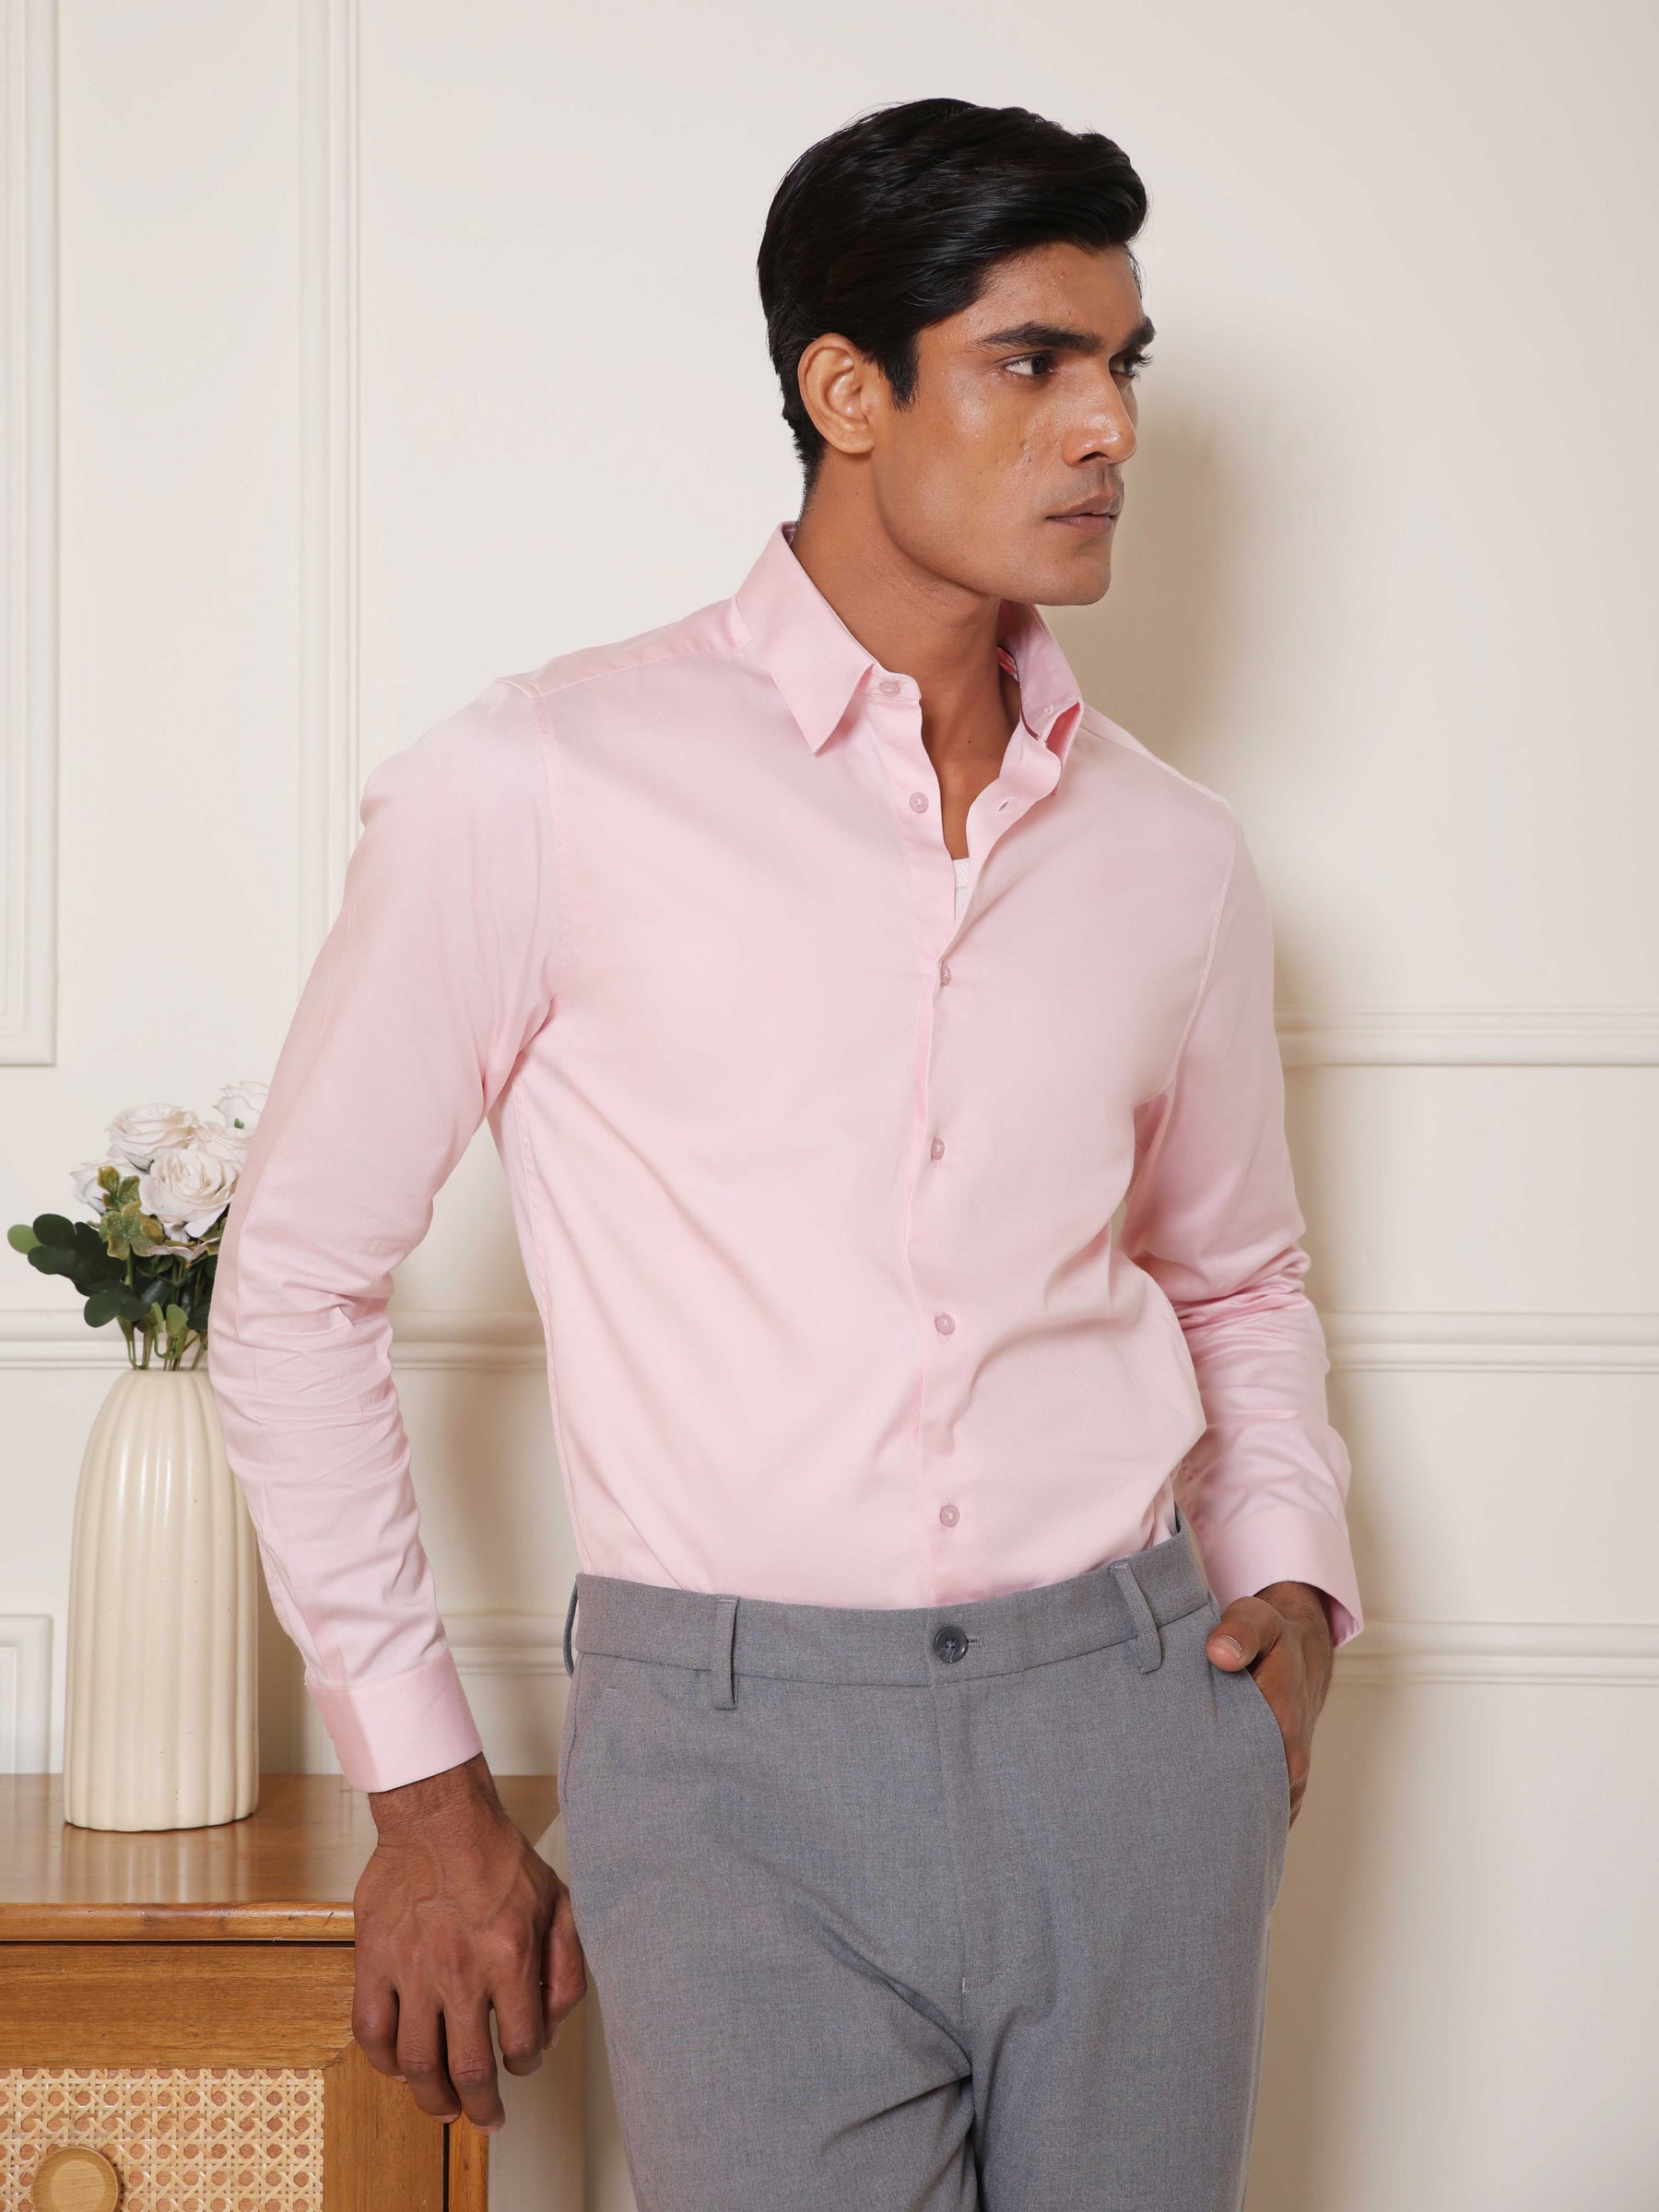 2 Way Stretch Satin Shirt in Ice Pink- Slim Fit